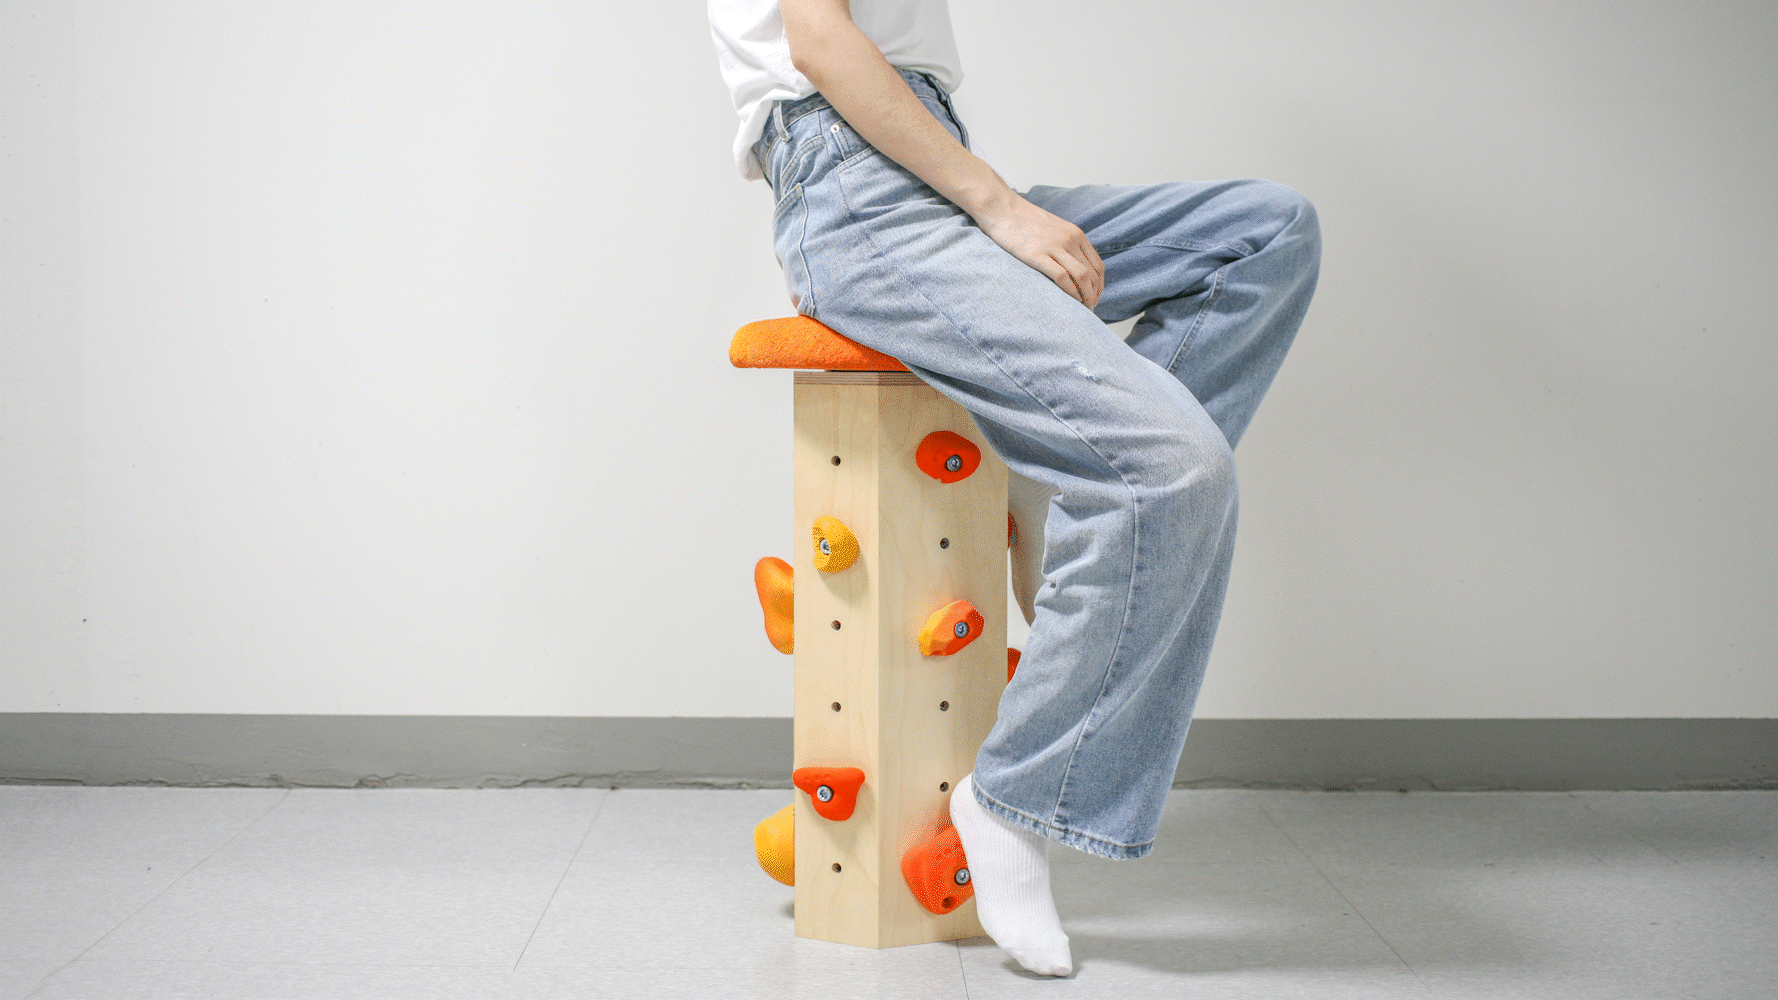 This playful bar stool uses rock climbing hand grips as foot rests